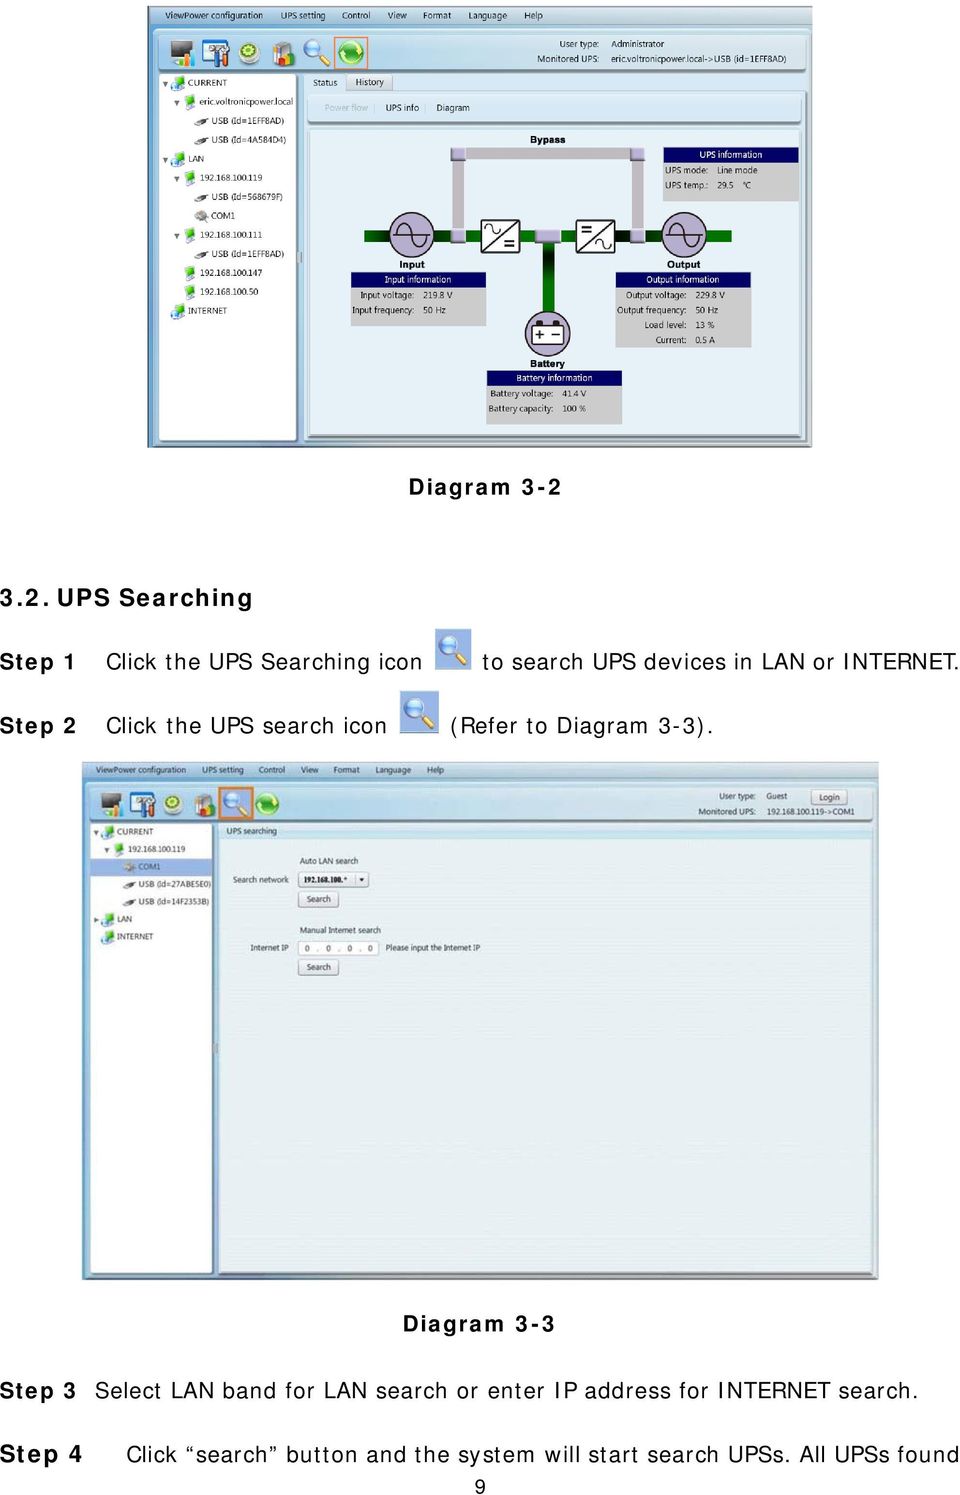 or INTERNET. Step 2 Click the UPS search icon (Refer to Diagram 3-3).